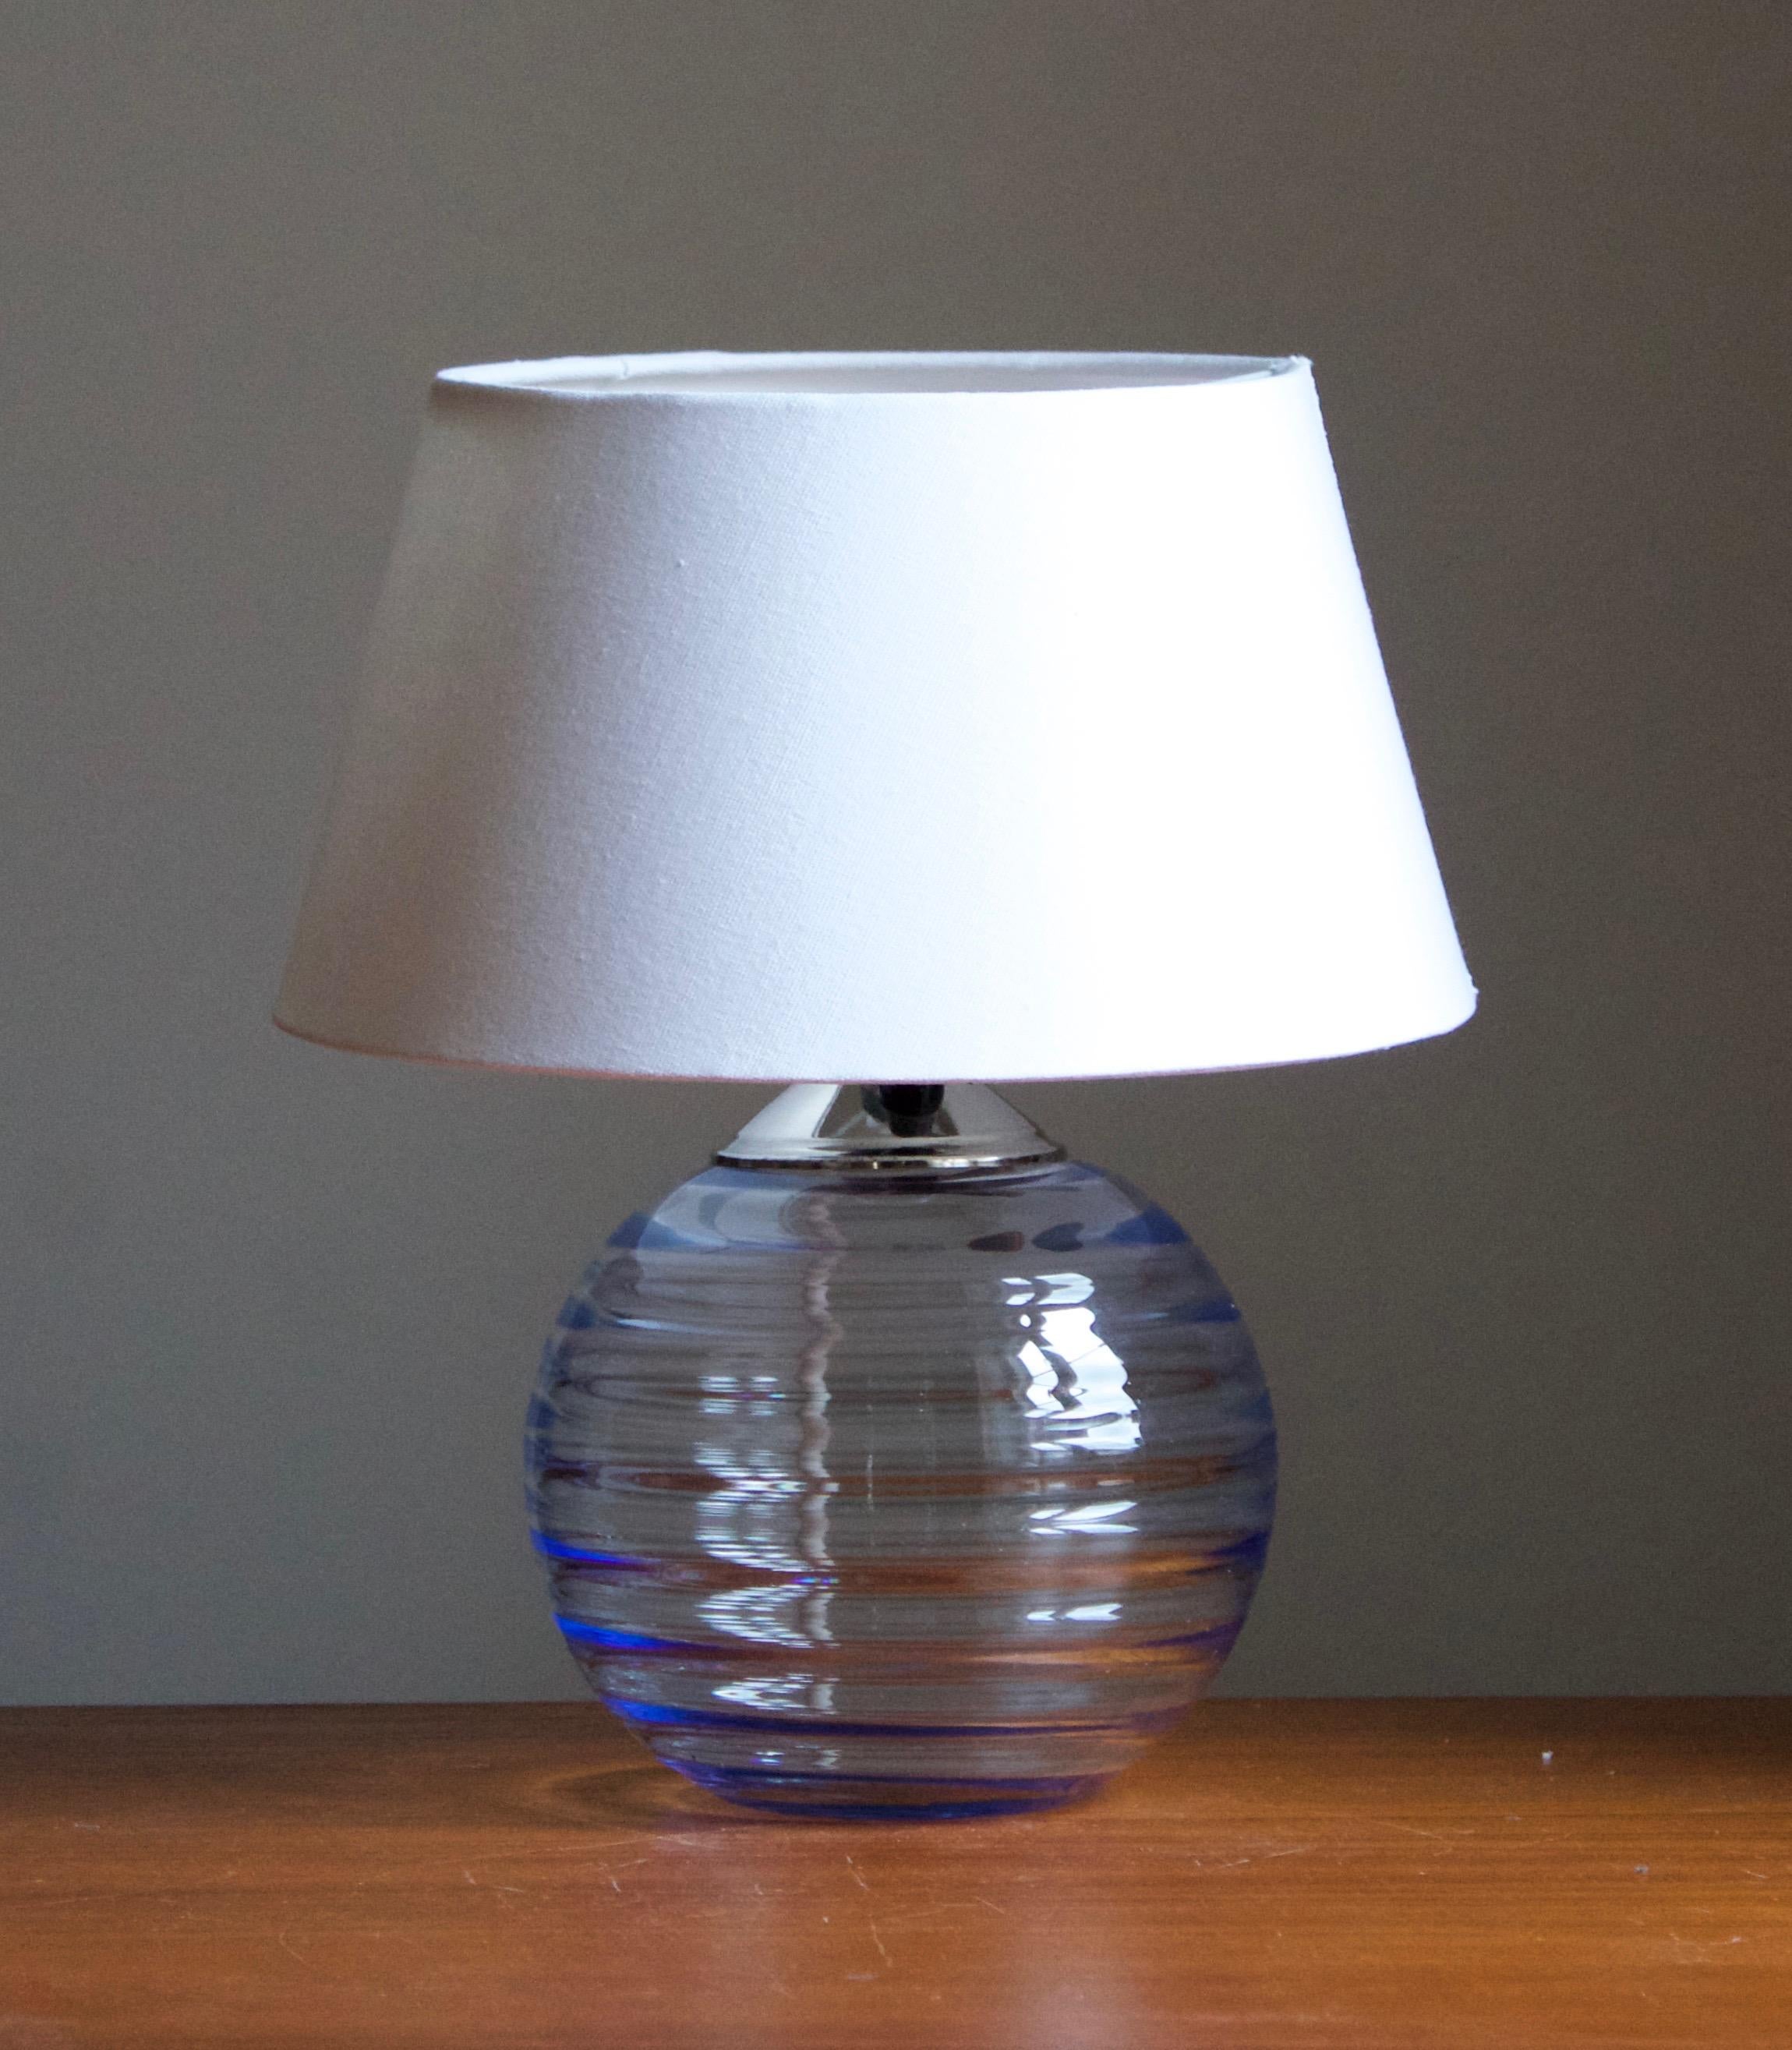 A modernist table lamp, design attributed to Edward Hald. Production attributed to Orrefors, c. 1930s.

Stated dimensions exclude lampshade. Height includes socket. Sold without lampshade.